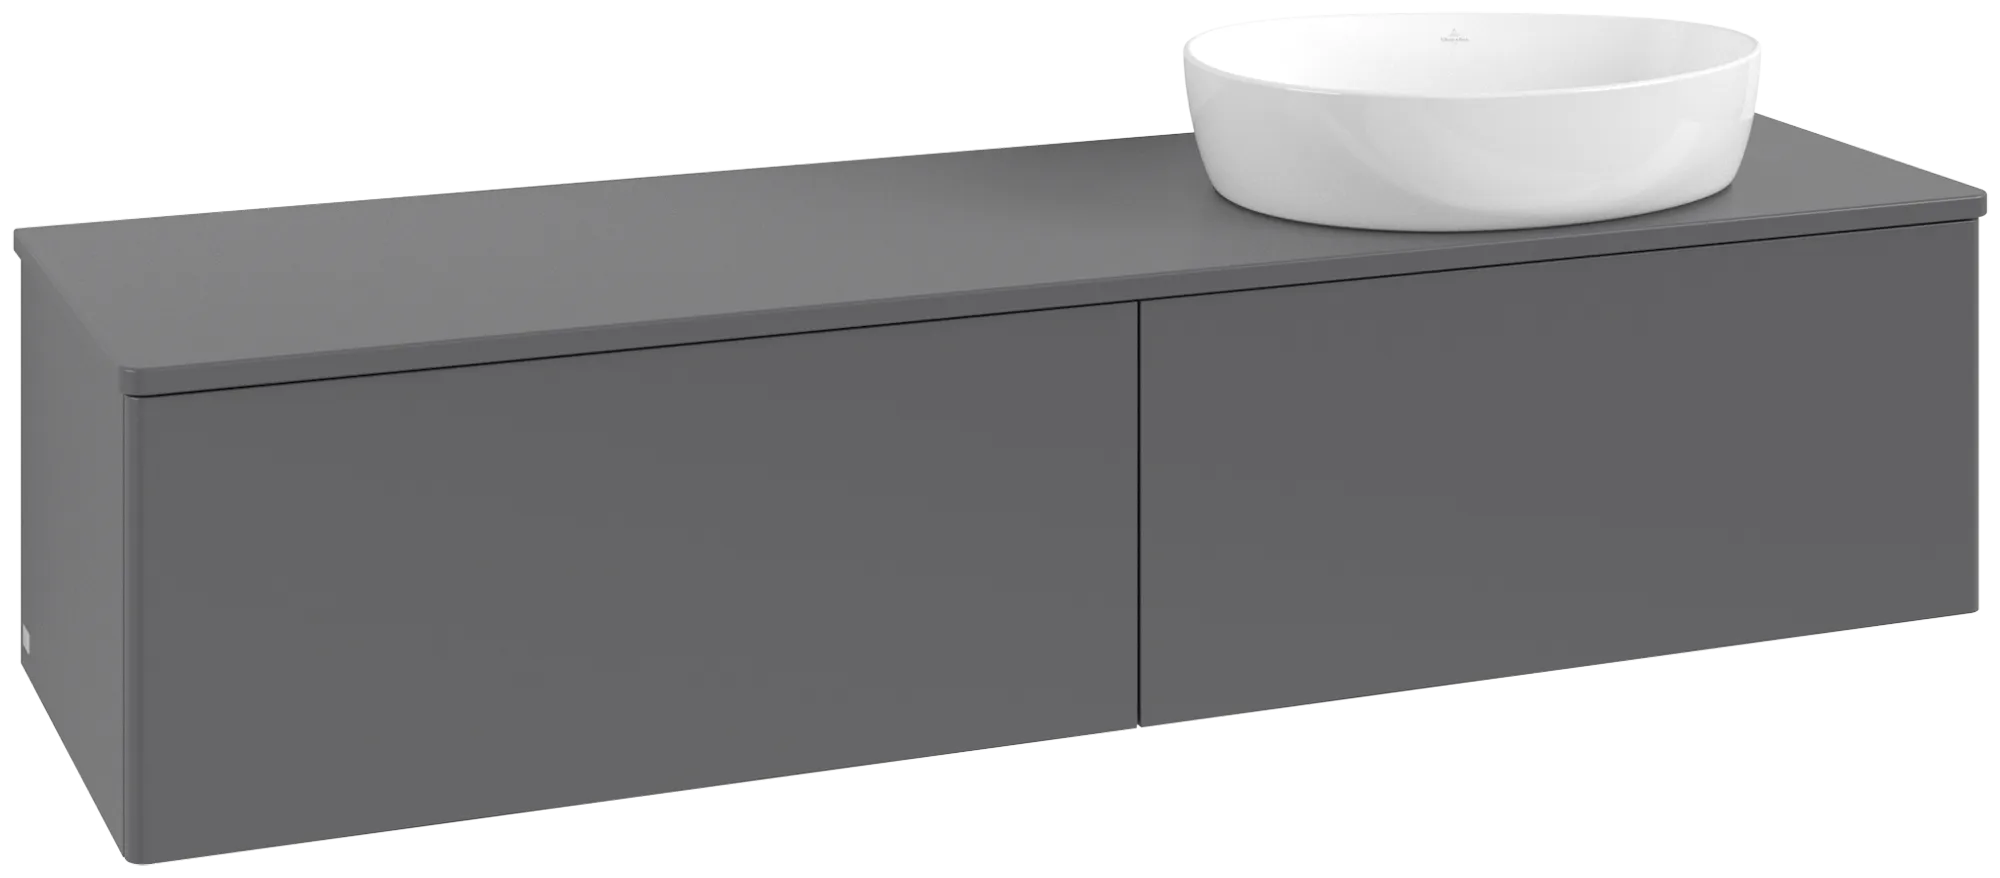 Picture of VILLEROY BOCH Antao Vanity unit, 2 pull-out compartments, 1600 x 360 x 500 mm, Front without structure, Anthracite Matt Lacquer / Anthracite Matt Lacquer #K38050GK